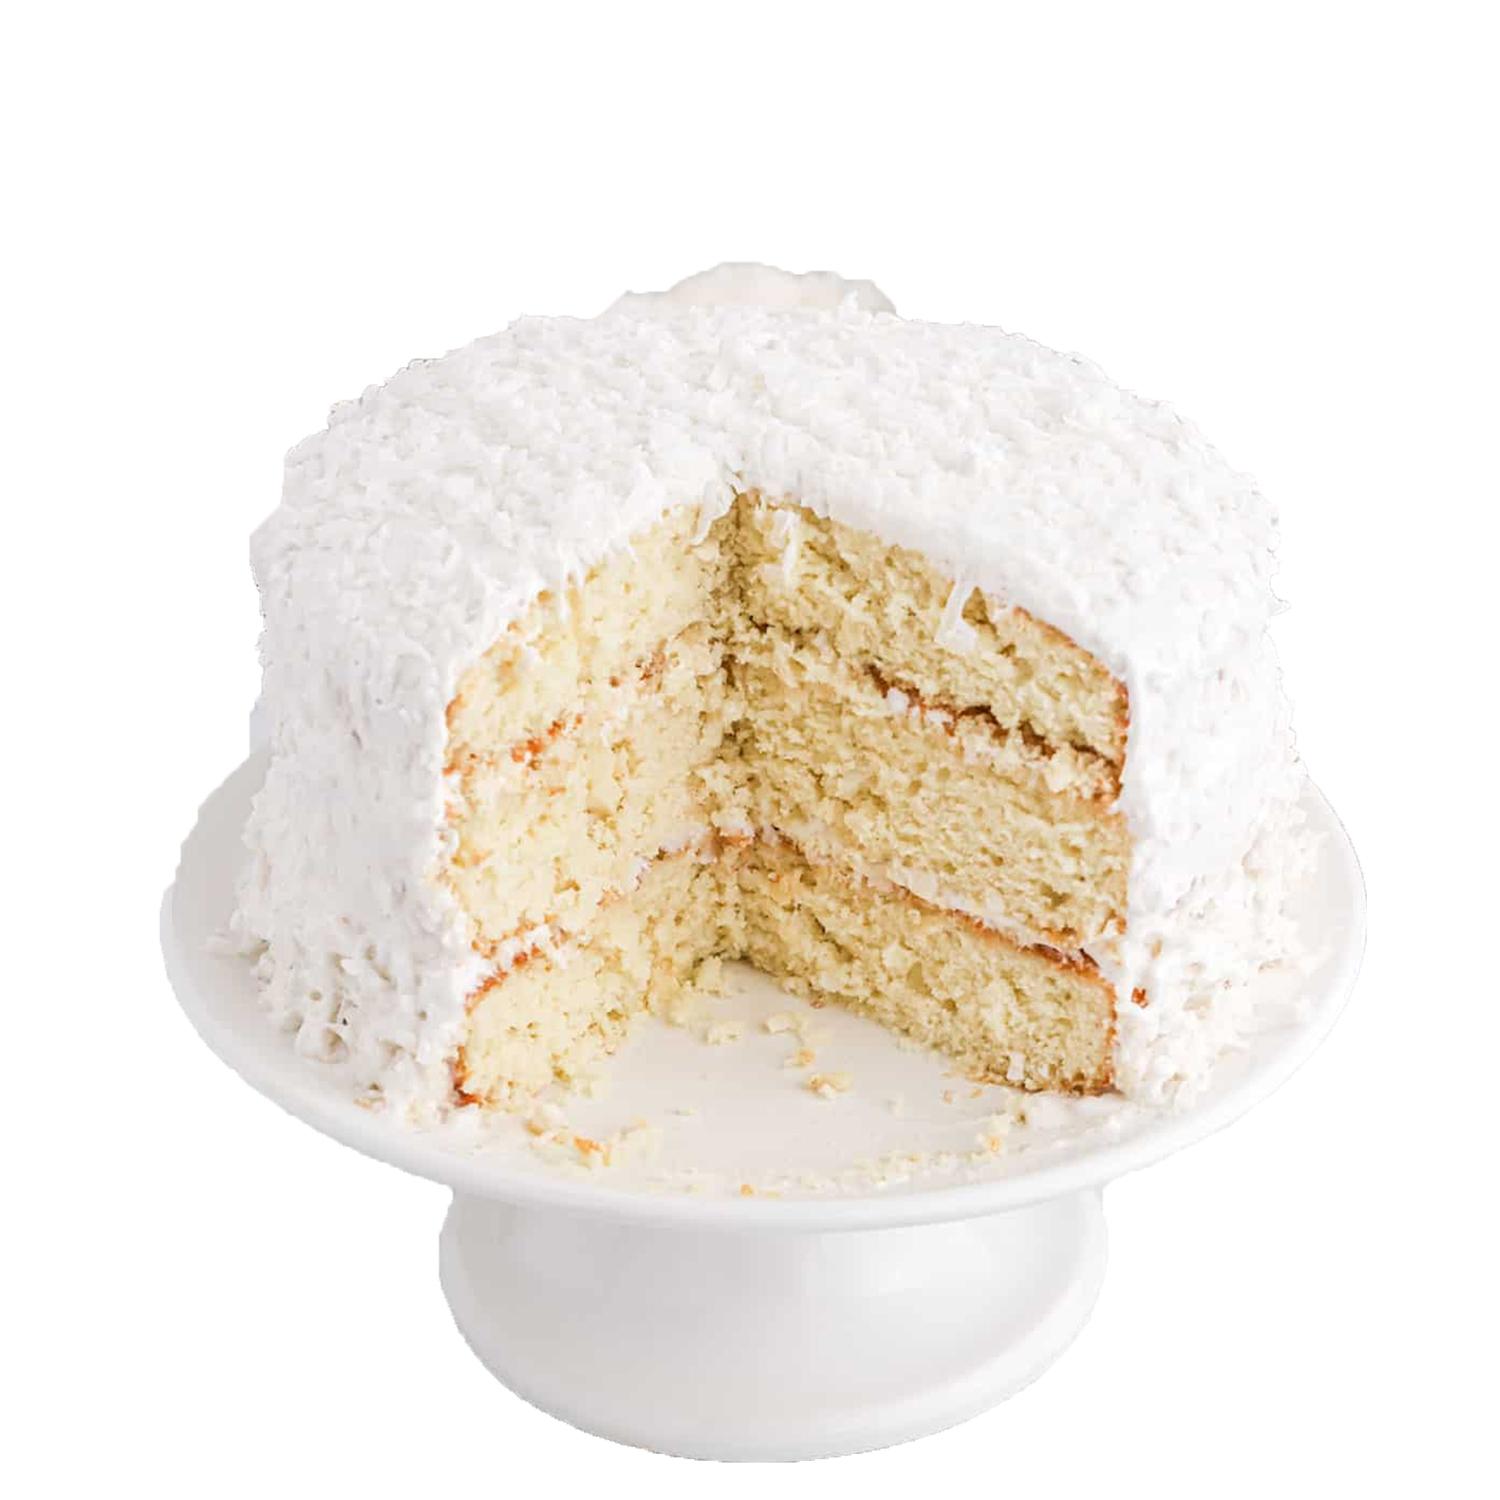 CAKE ANGEL COCONUT FLAVOUR